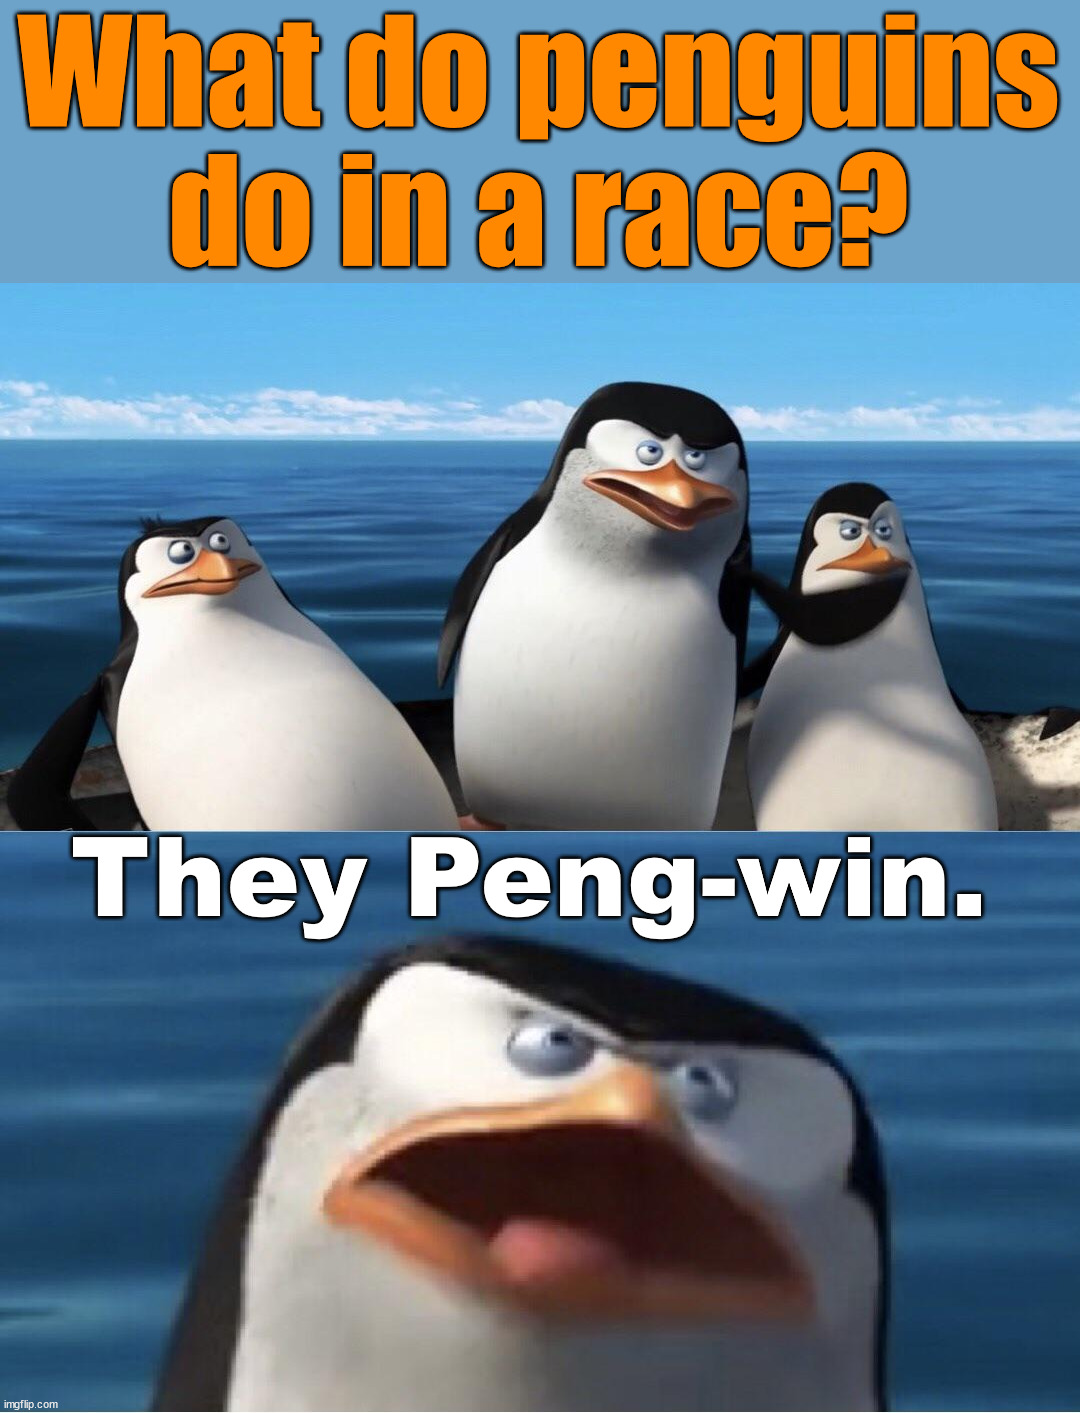 Wouldn't that make you | What do penguins do in a race? They Peng-win. | image tagged in wouldn't that make you,eye roll | made w/ Imgflip meme maker